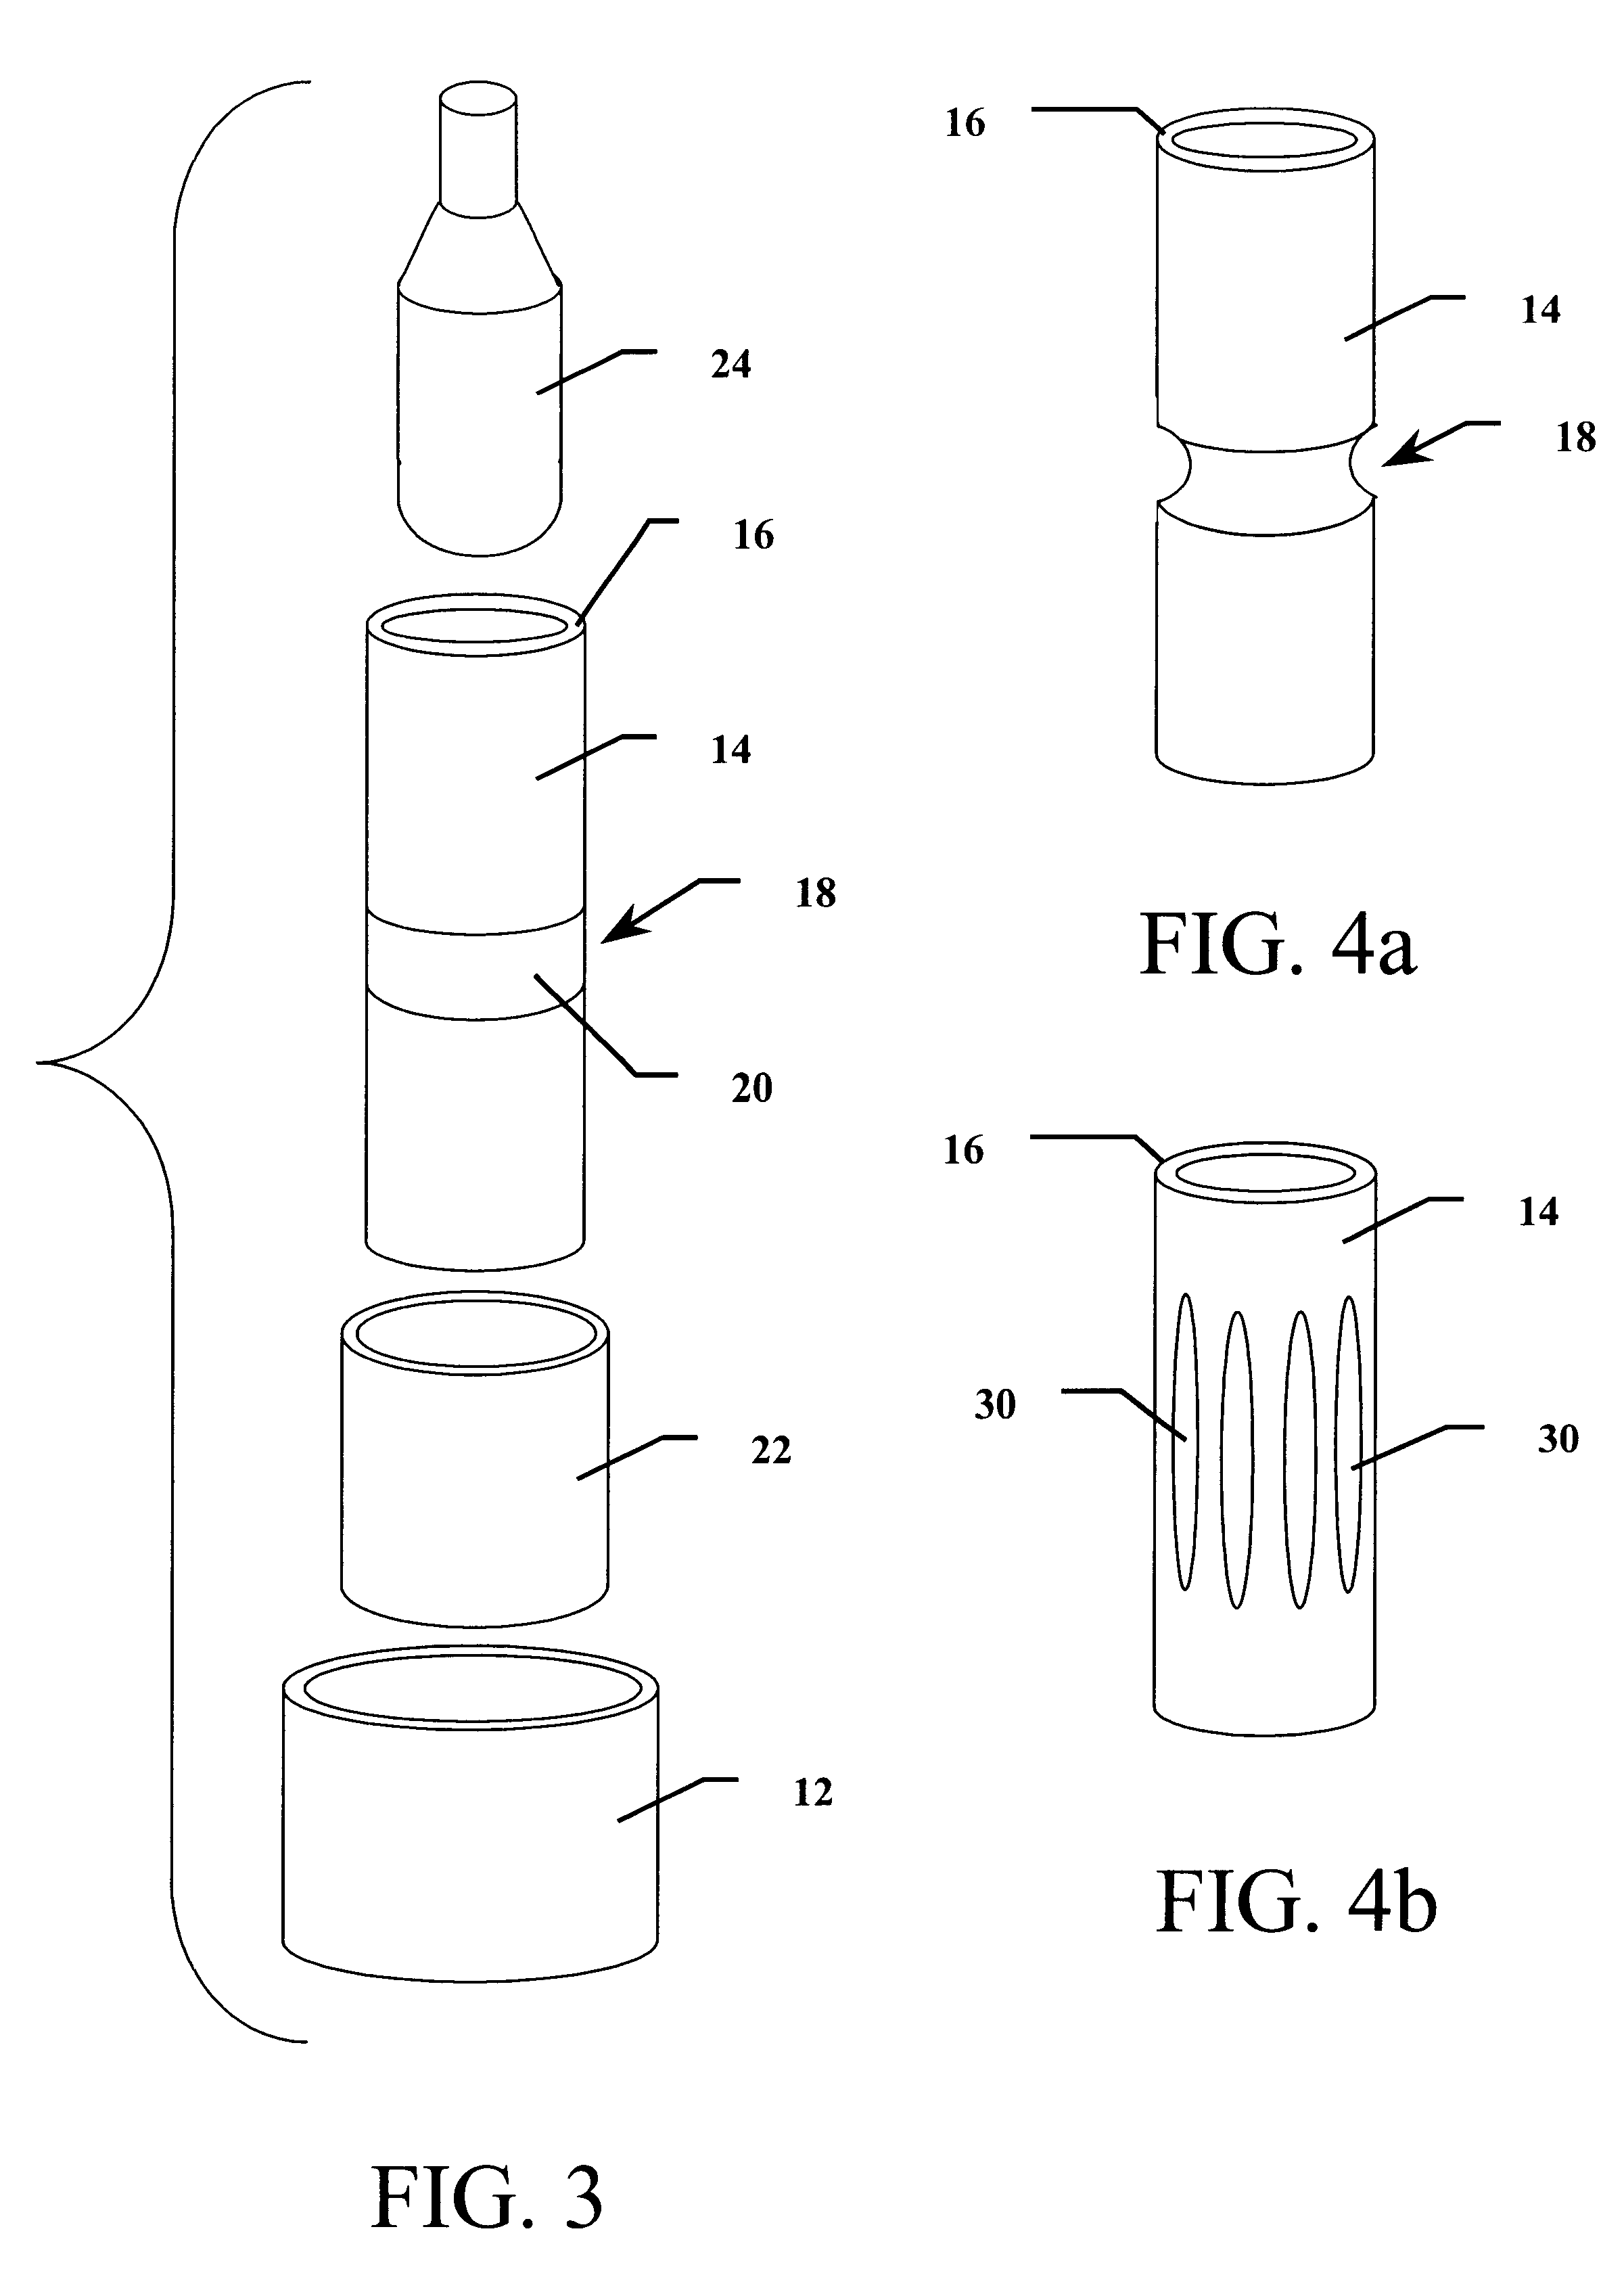 Method and apparatus for expansion sealing concentric tubular structures